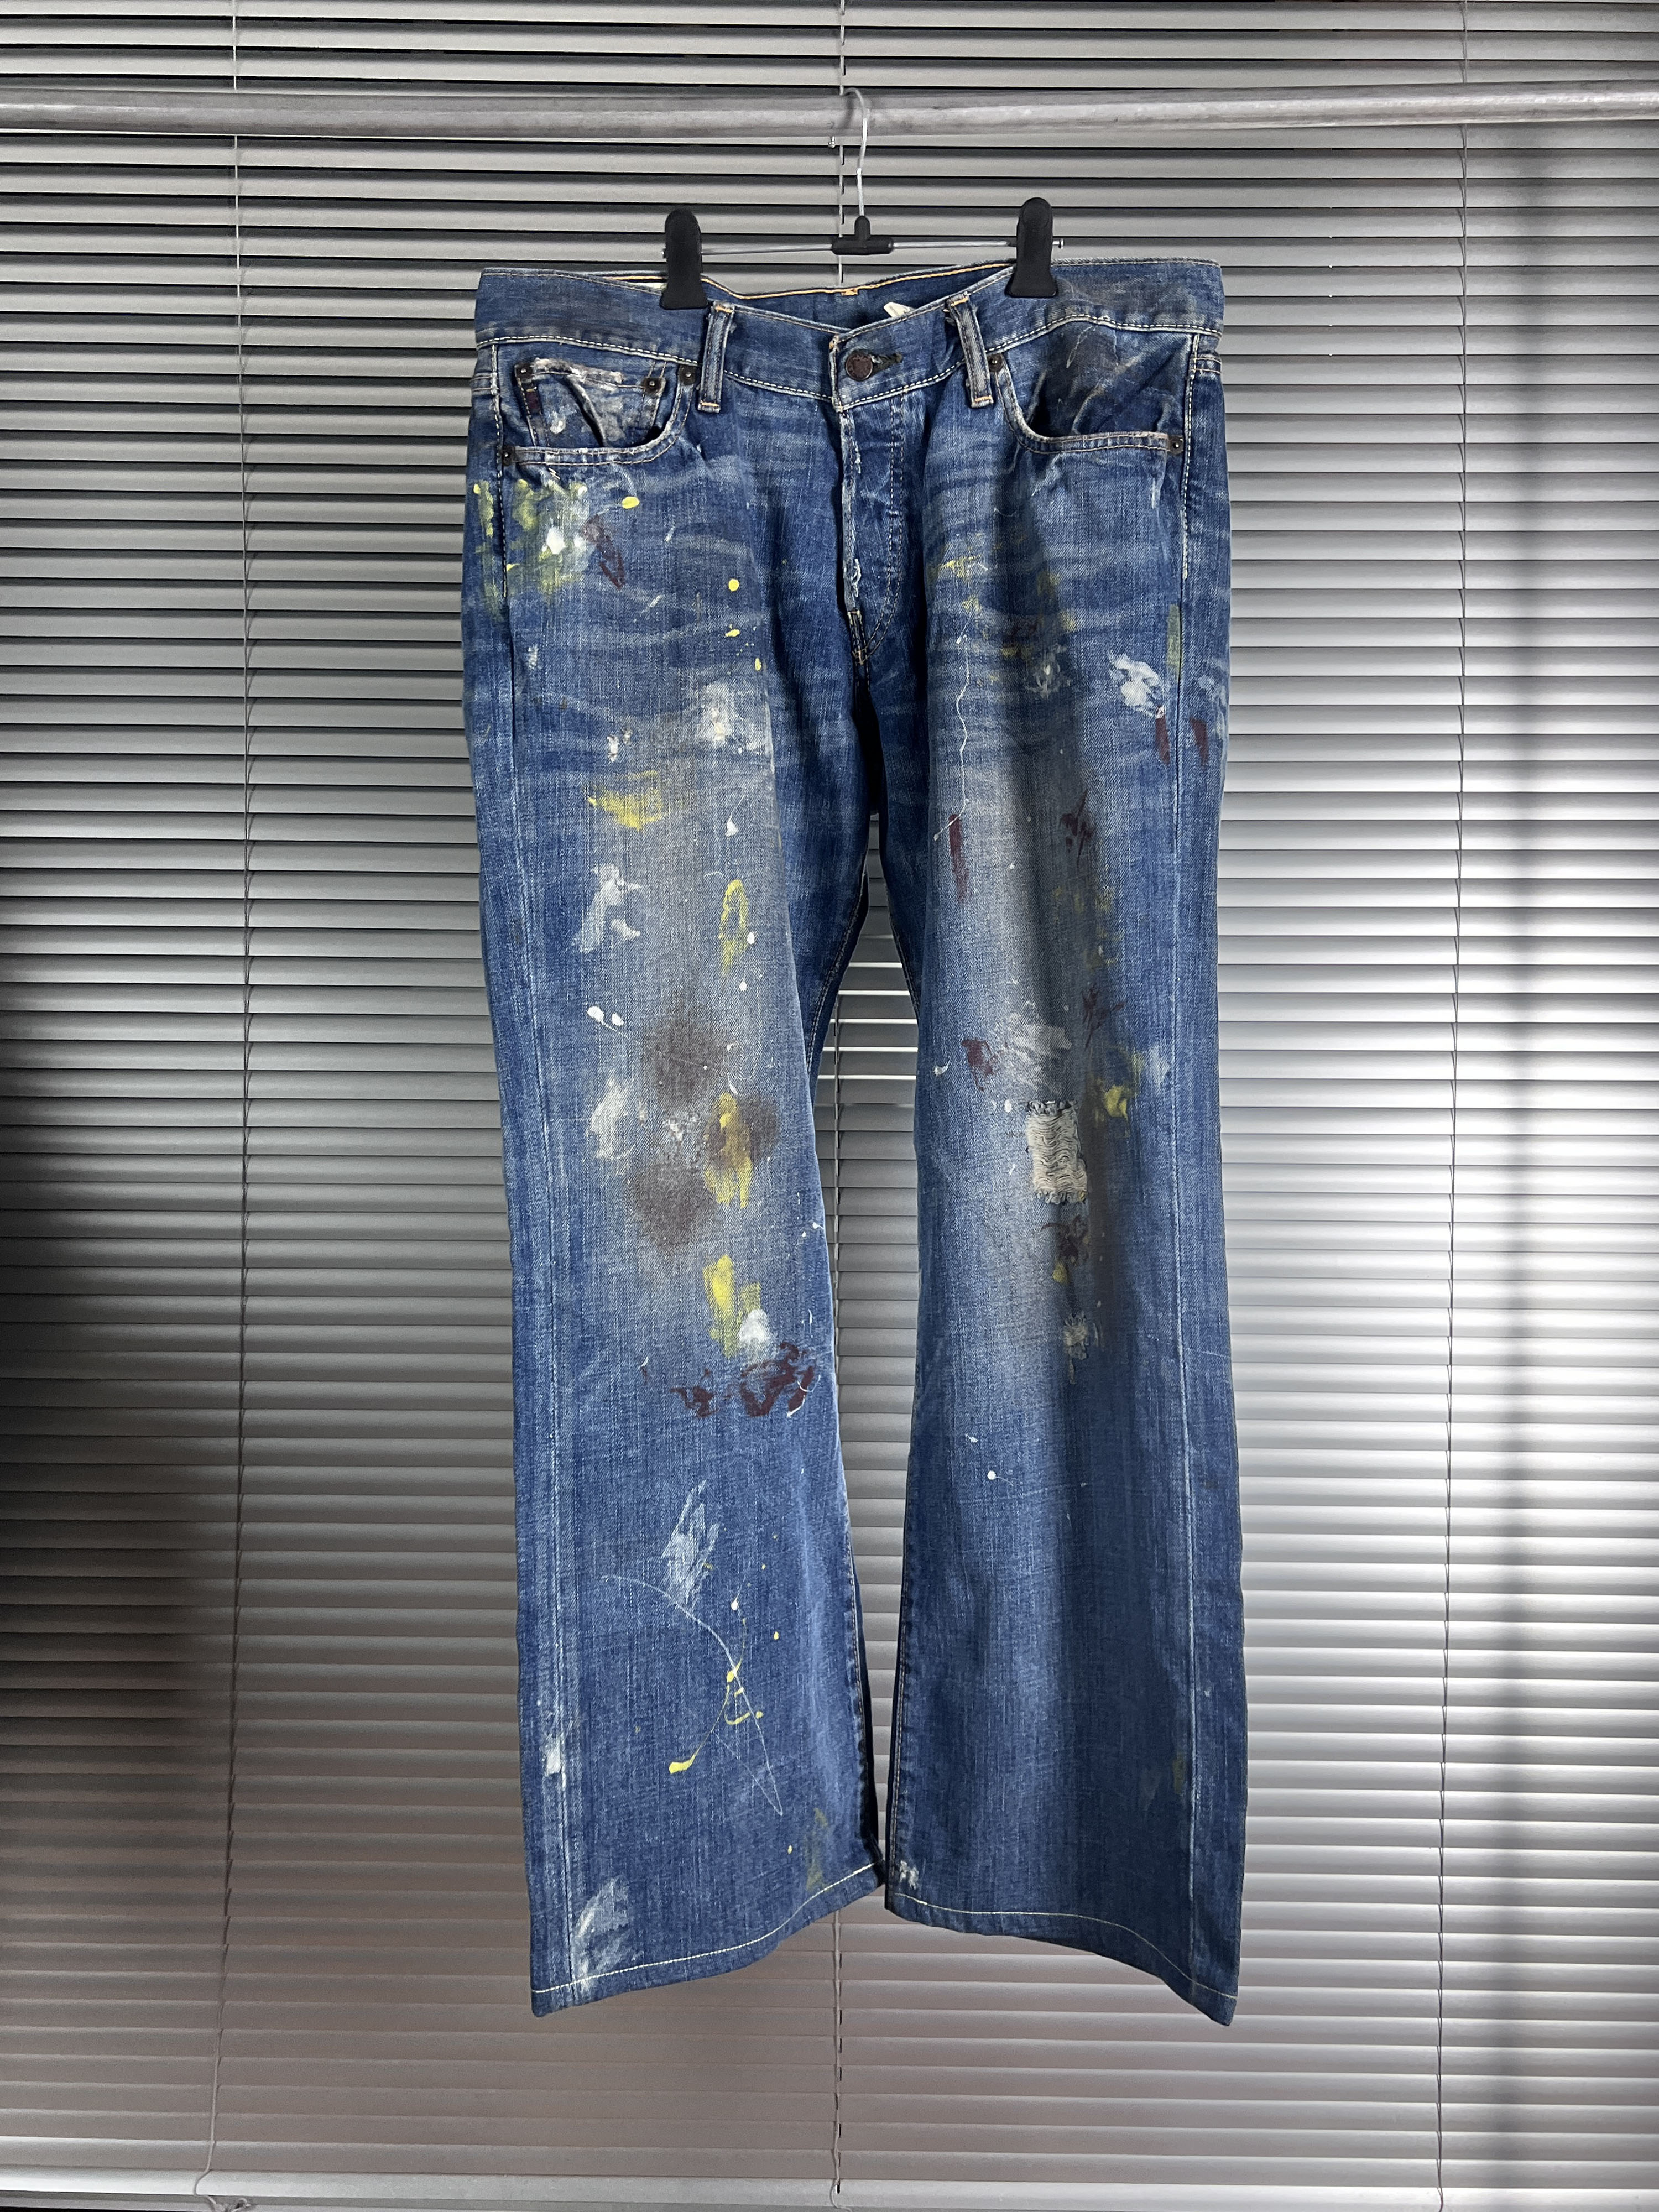 ABECROMBIE &amp; FITCH painted jean